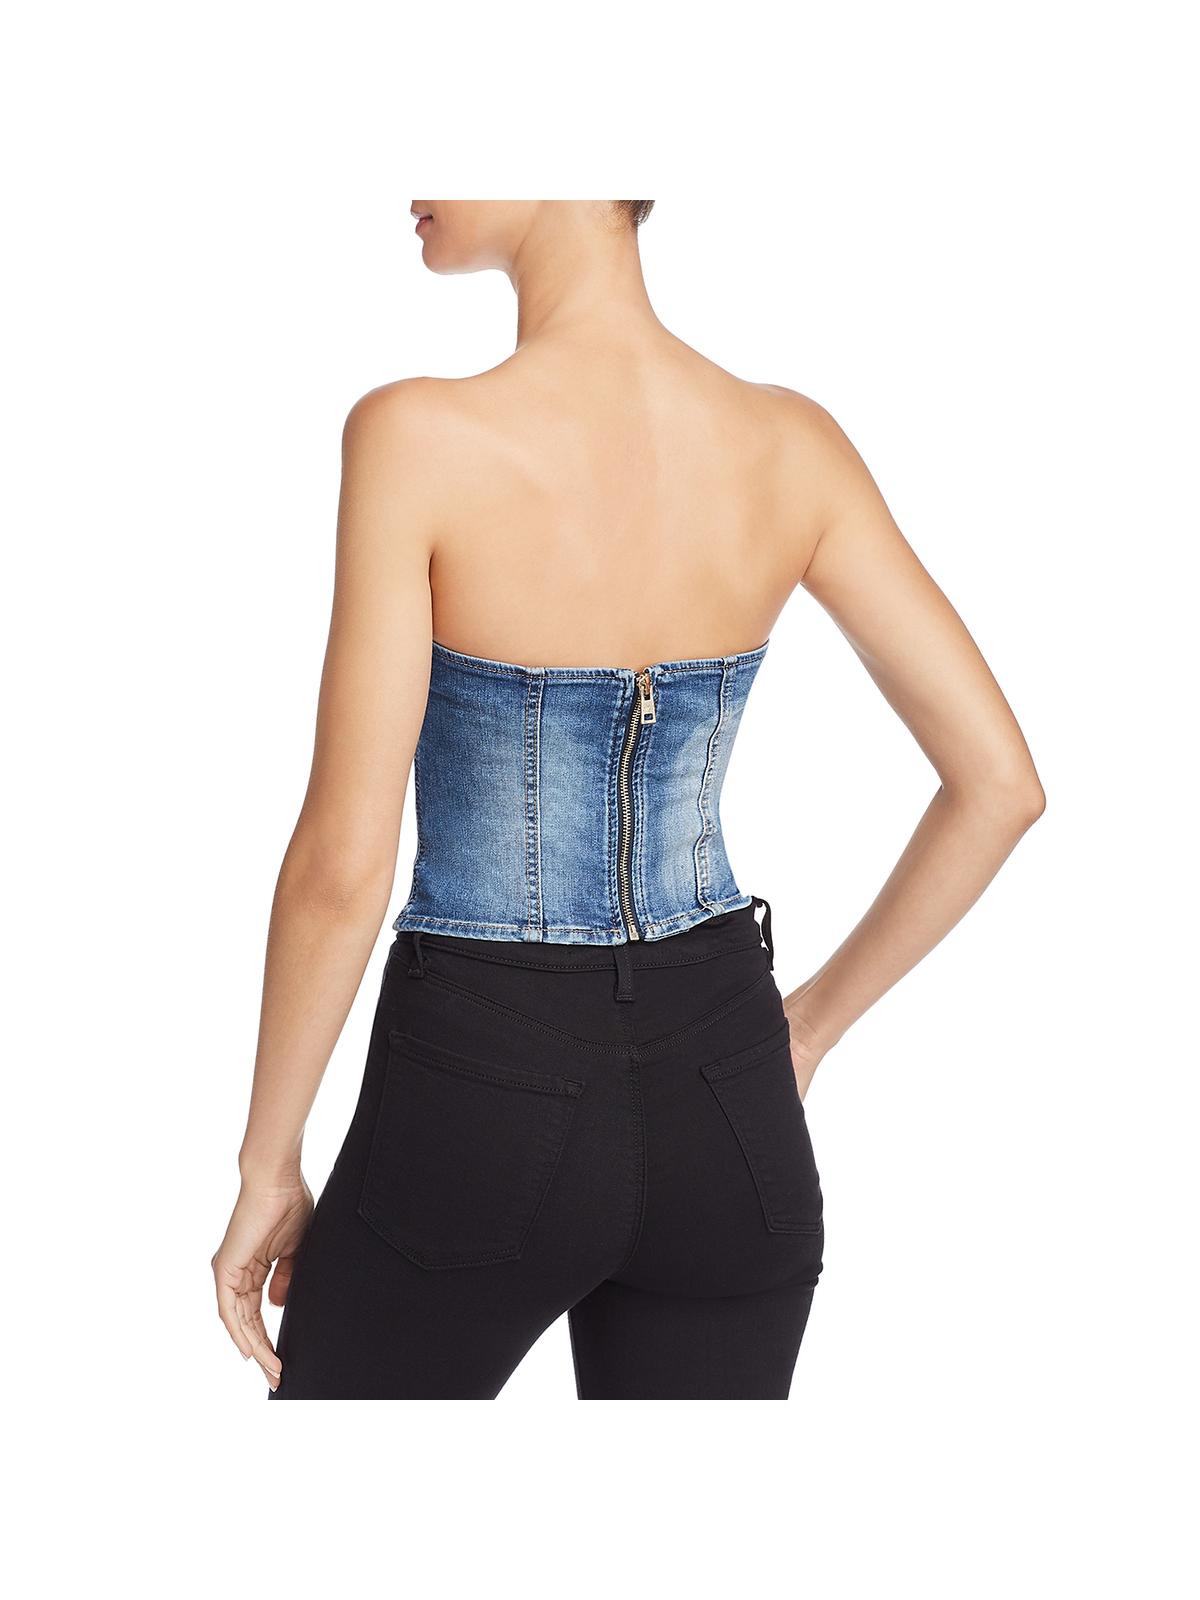 Guess Womens Denim Strapless Corset Top - image 2 of 2